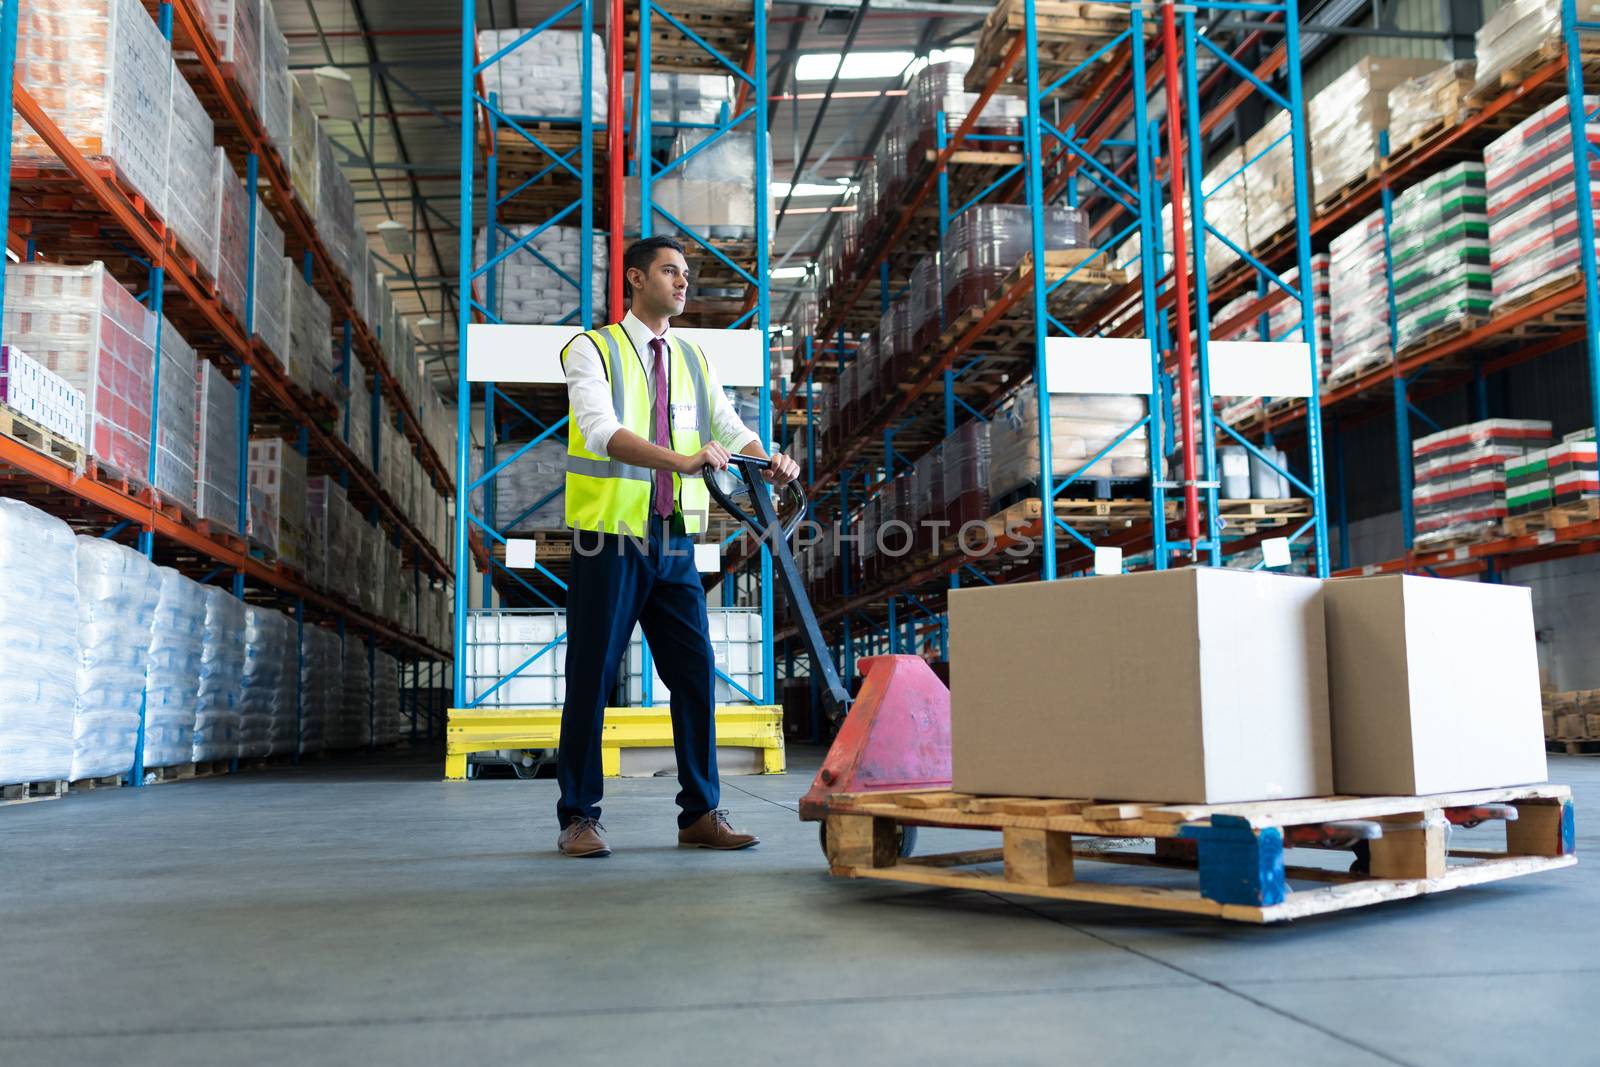 Side view of Caucasian male staff using pallet jack in warehouse. This is a freight transportation and distribution warehouse. Industrial and industrial workers concept